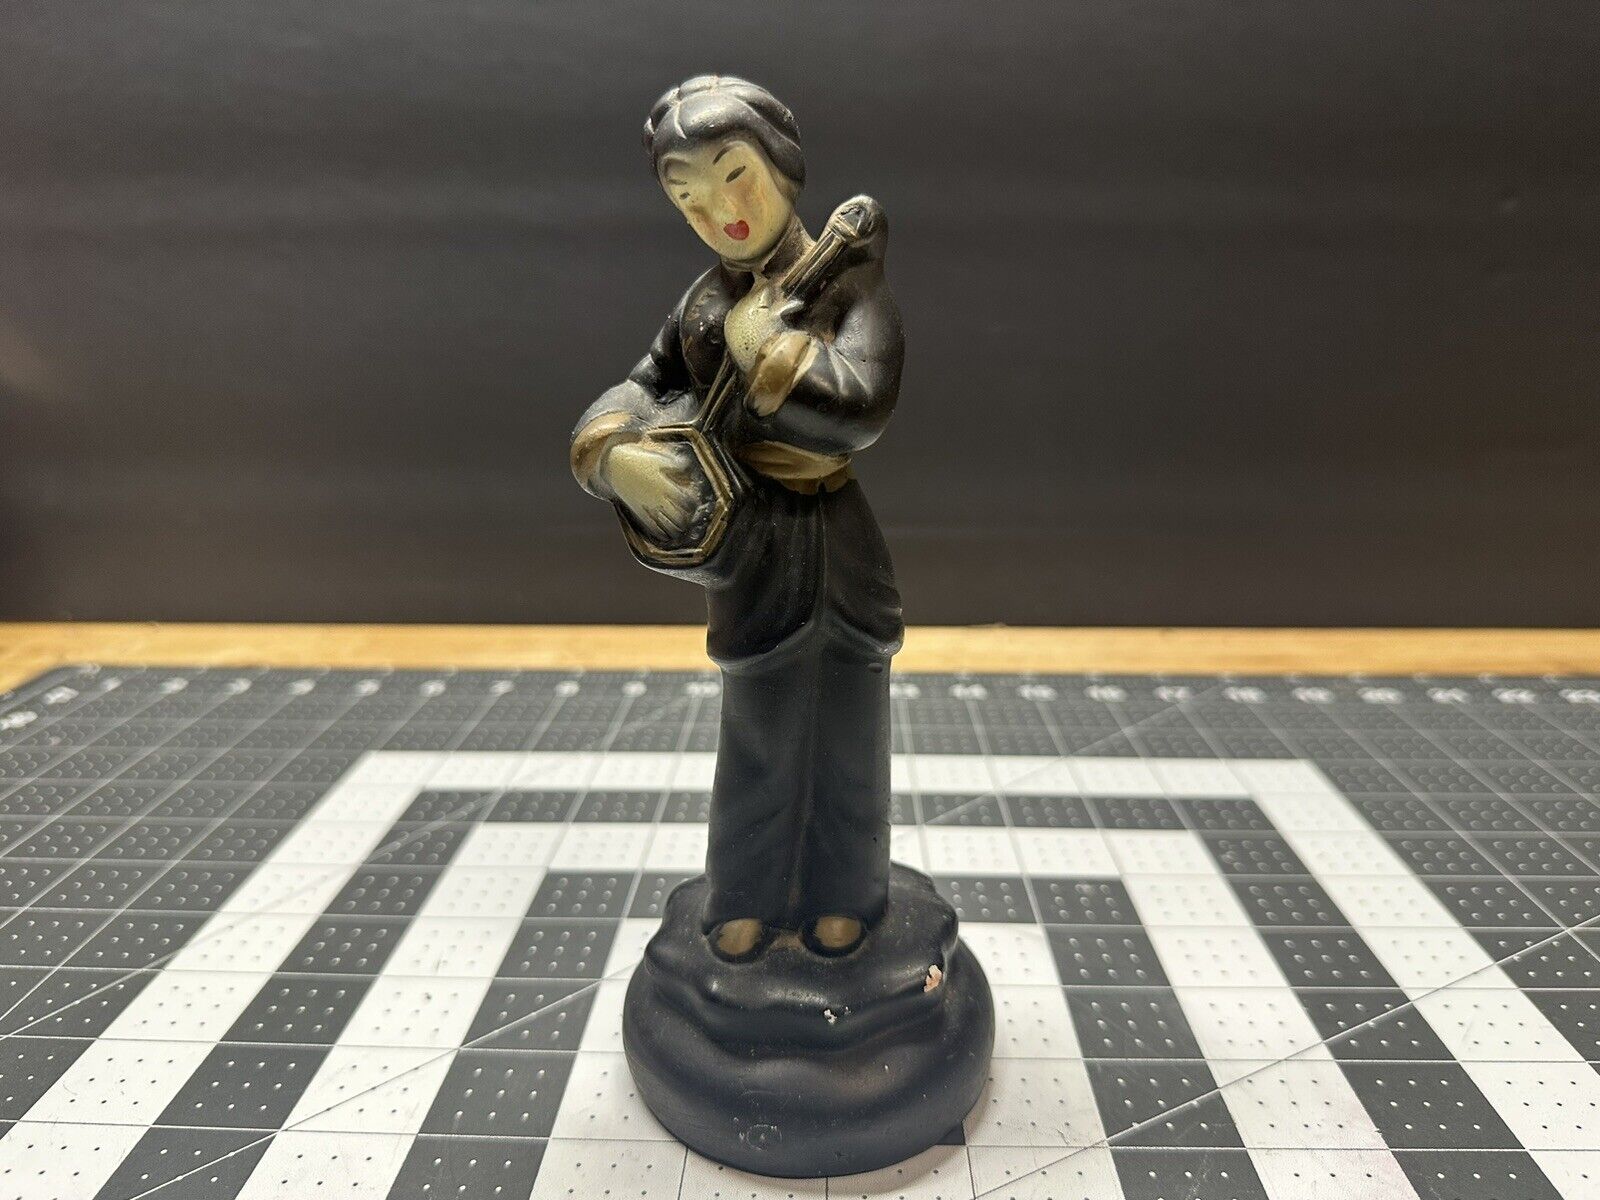 Vintage 1950's Asian Woman Playing Music Instrument Chalkware Musician Figurine